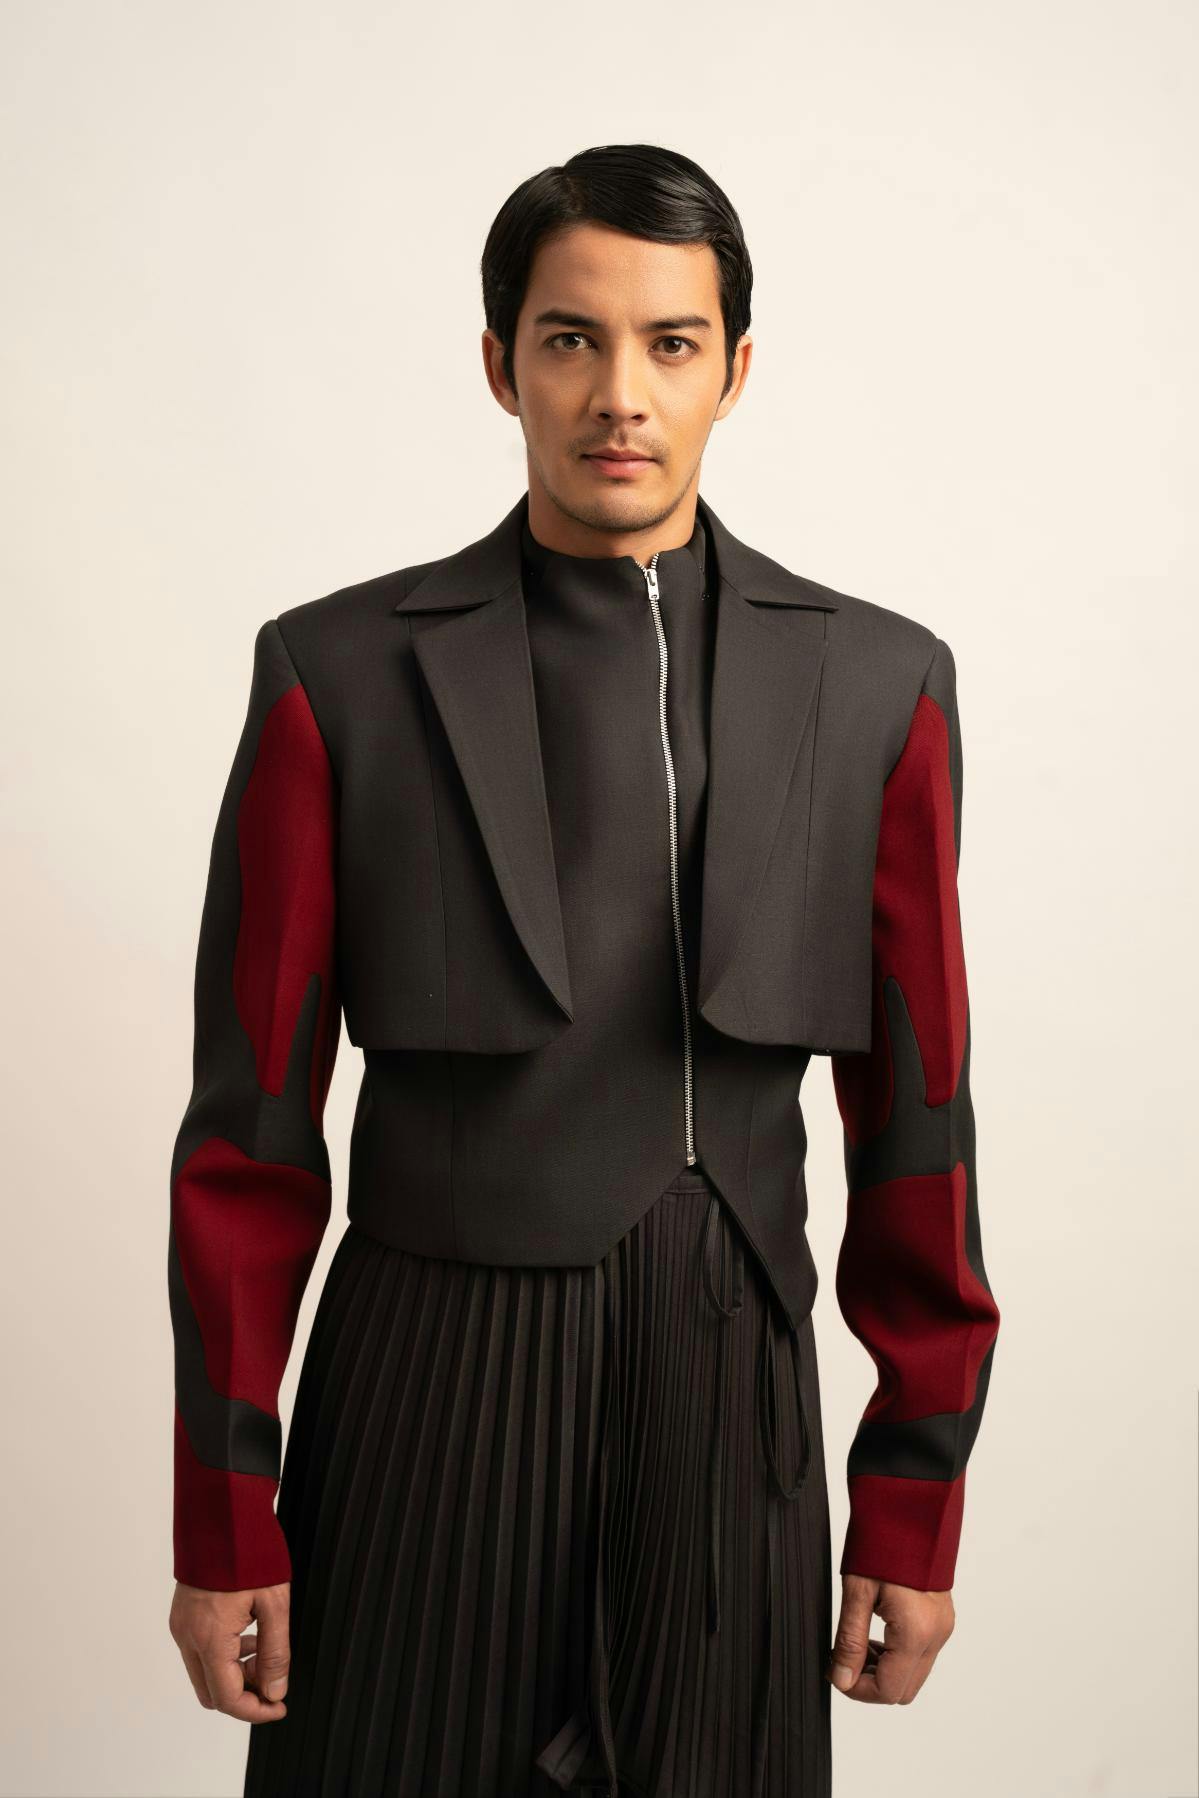 The Seraphic Symphony Cropped Blazer Jacket, a product by Siddhant Agrawal Label